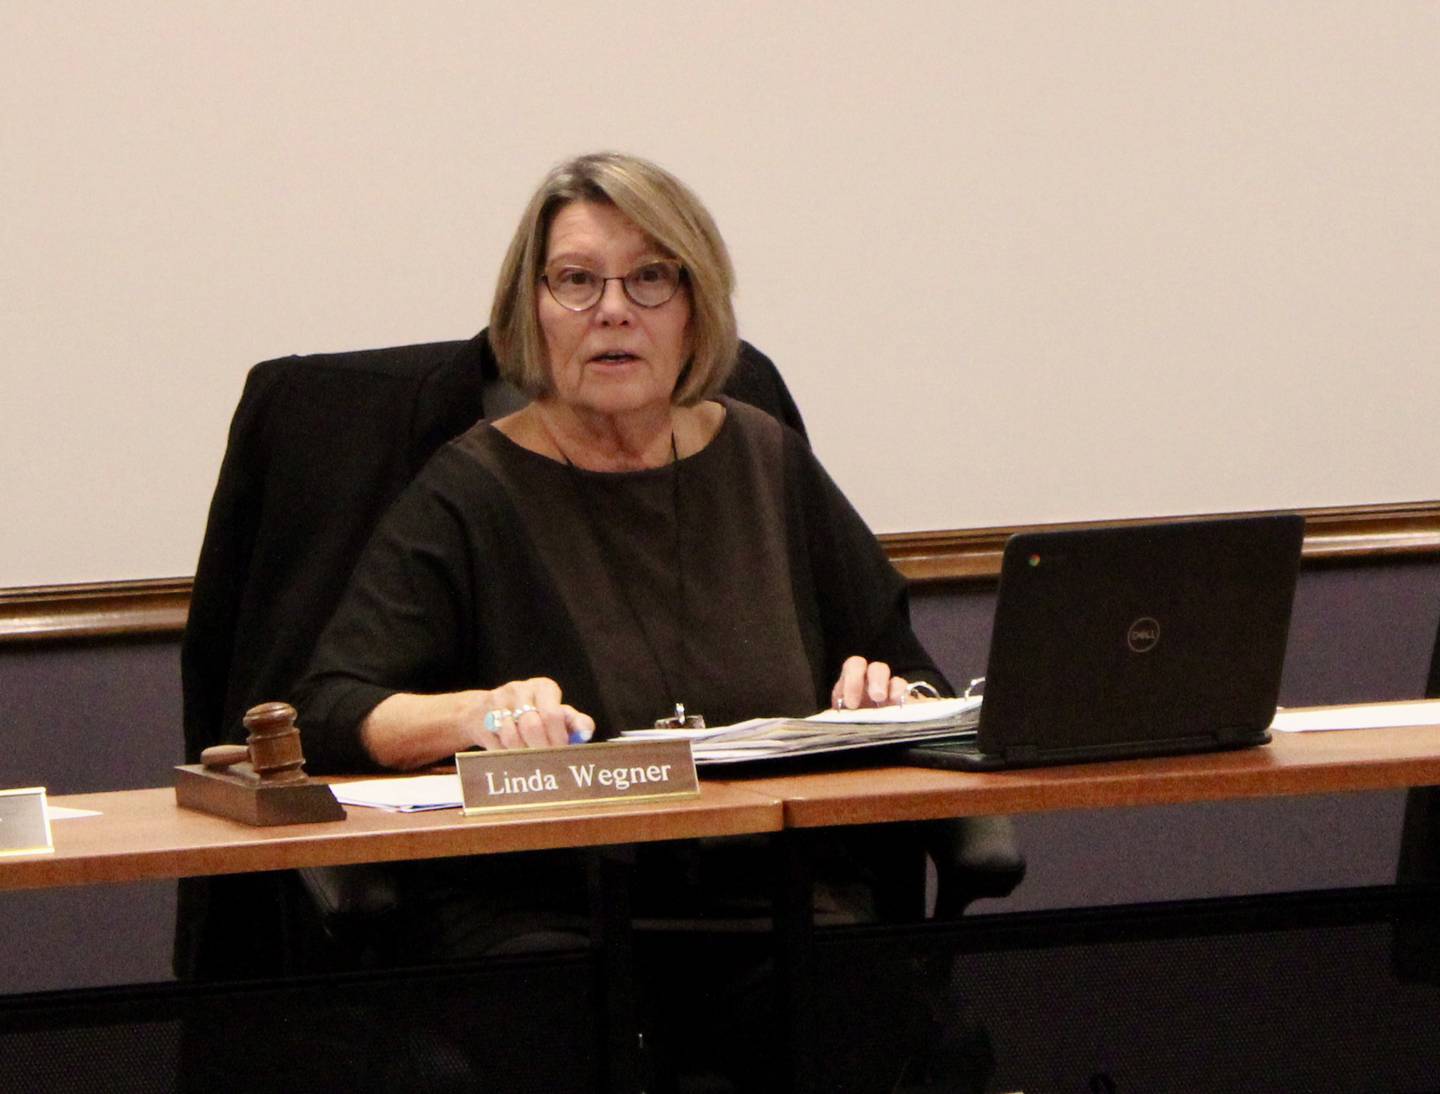 Dixon Public Schools board of education President Linda Wegner convenes the meeting Wednesday, Oct. 19, 2022 at the district offices on Franklin Road in Dixon.